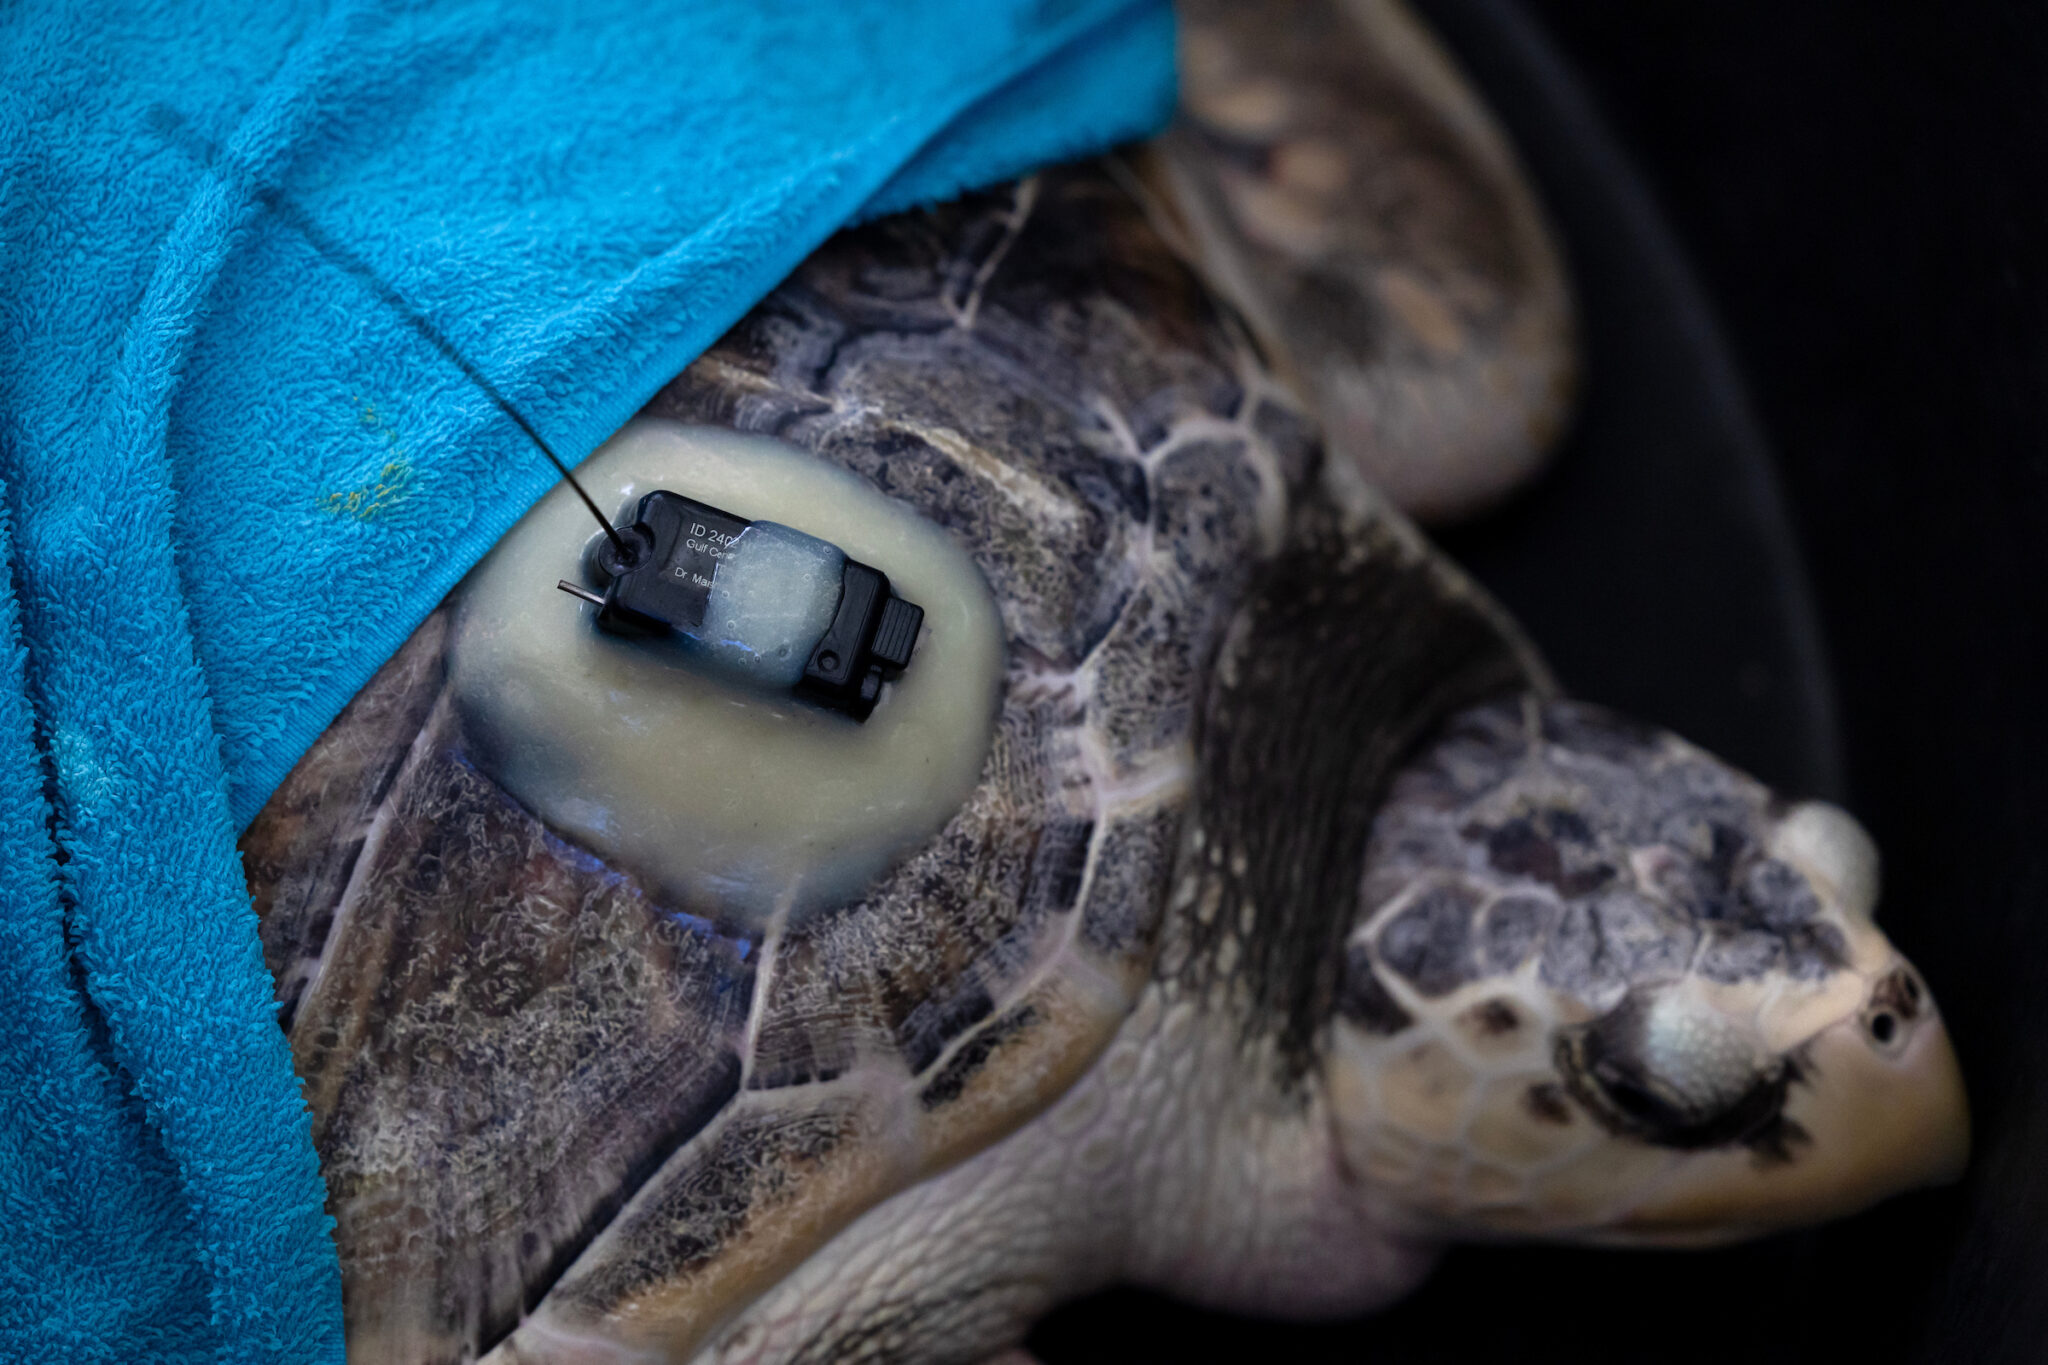 Close-up of Tally the sea turtle wrapped in a blue towl and wearing a GPS tracker